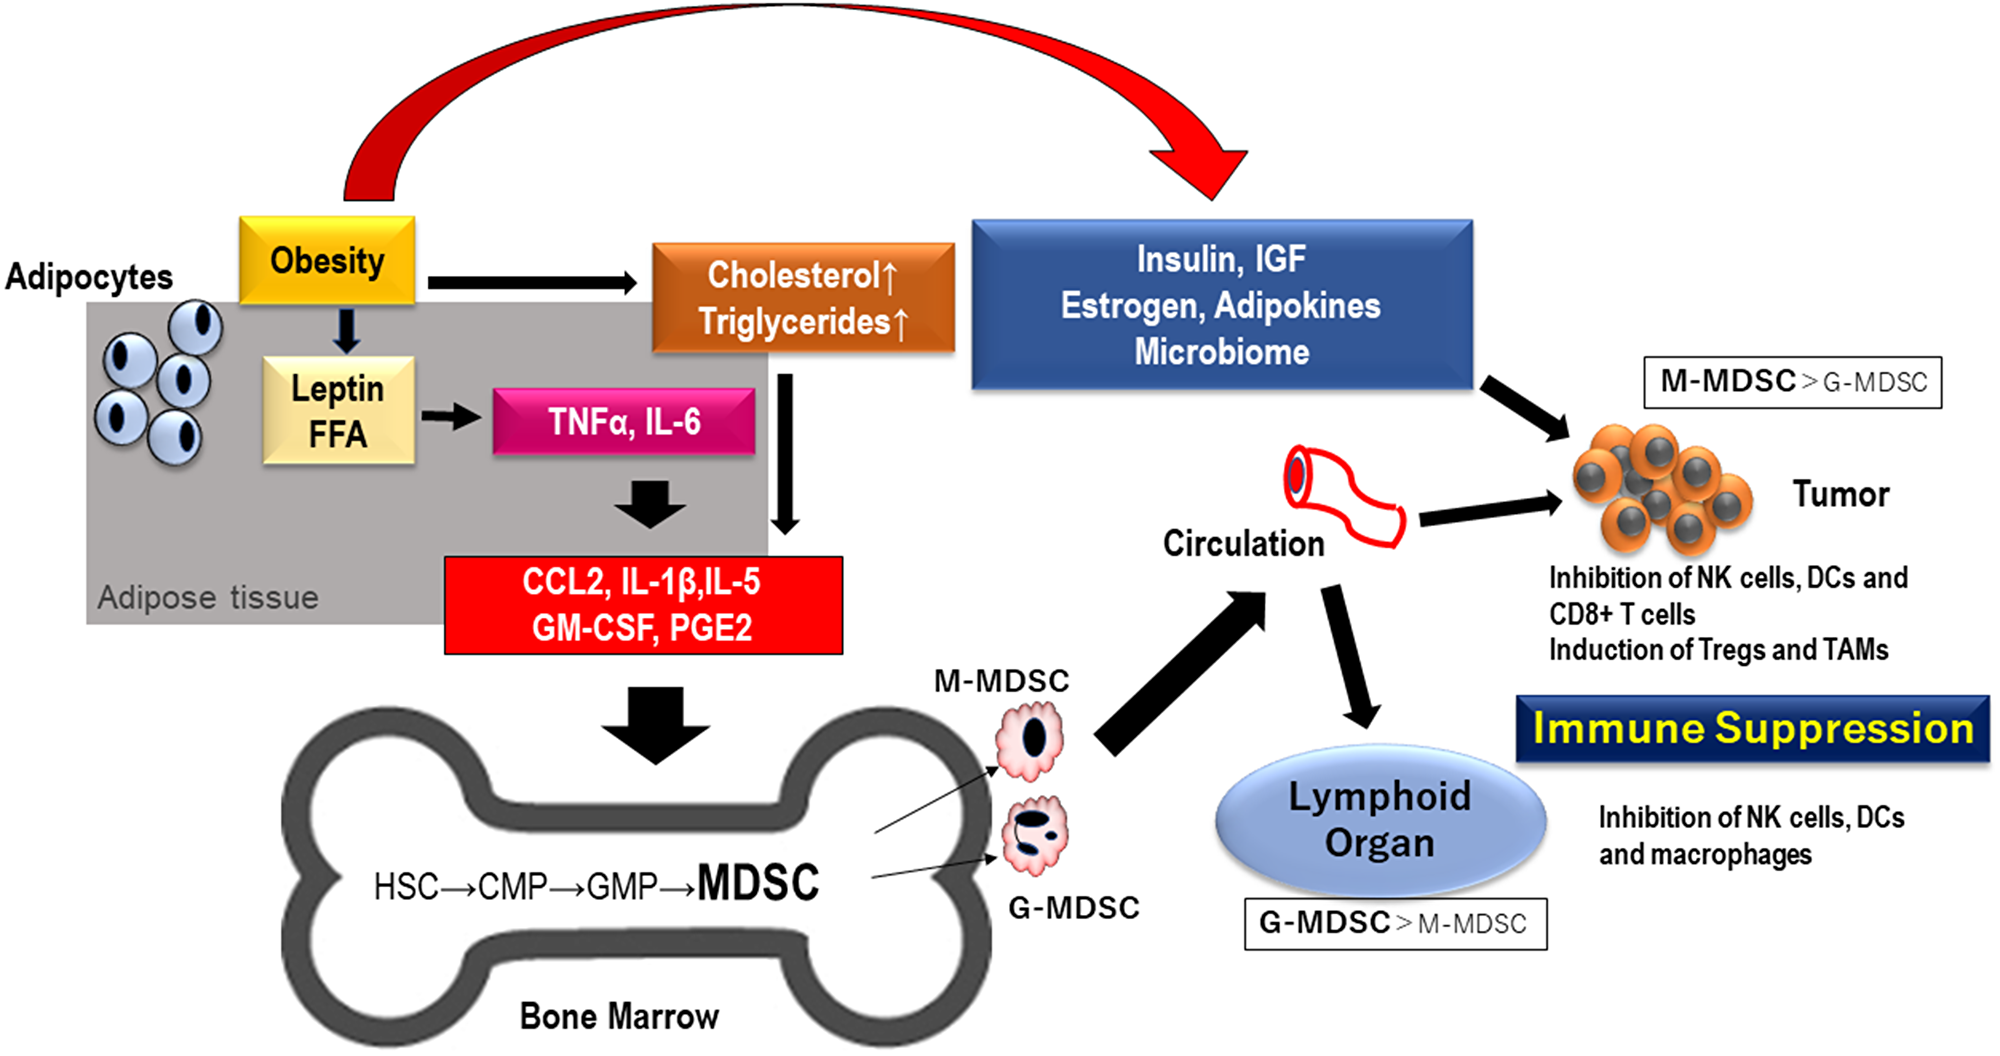 MDSCs generated by obesity migrate to lymphoid organ and TME.